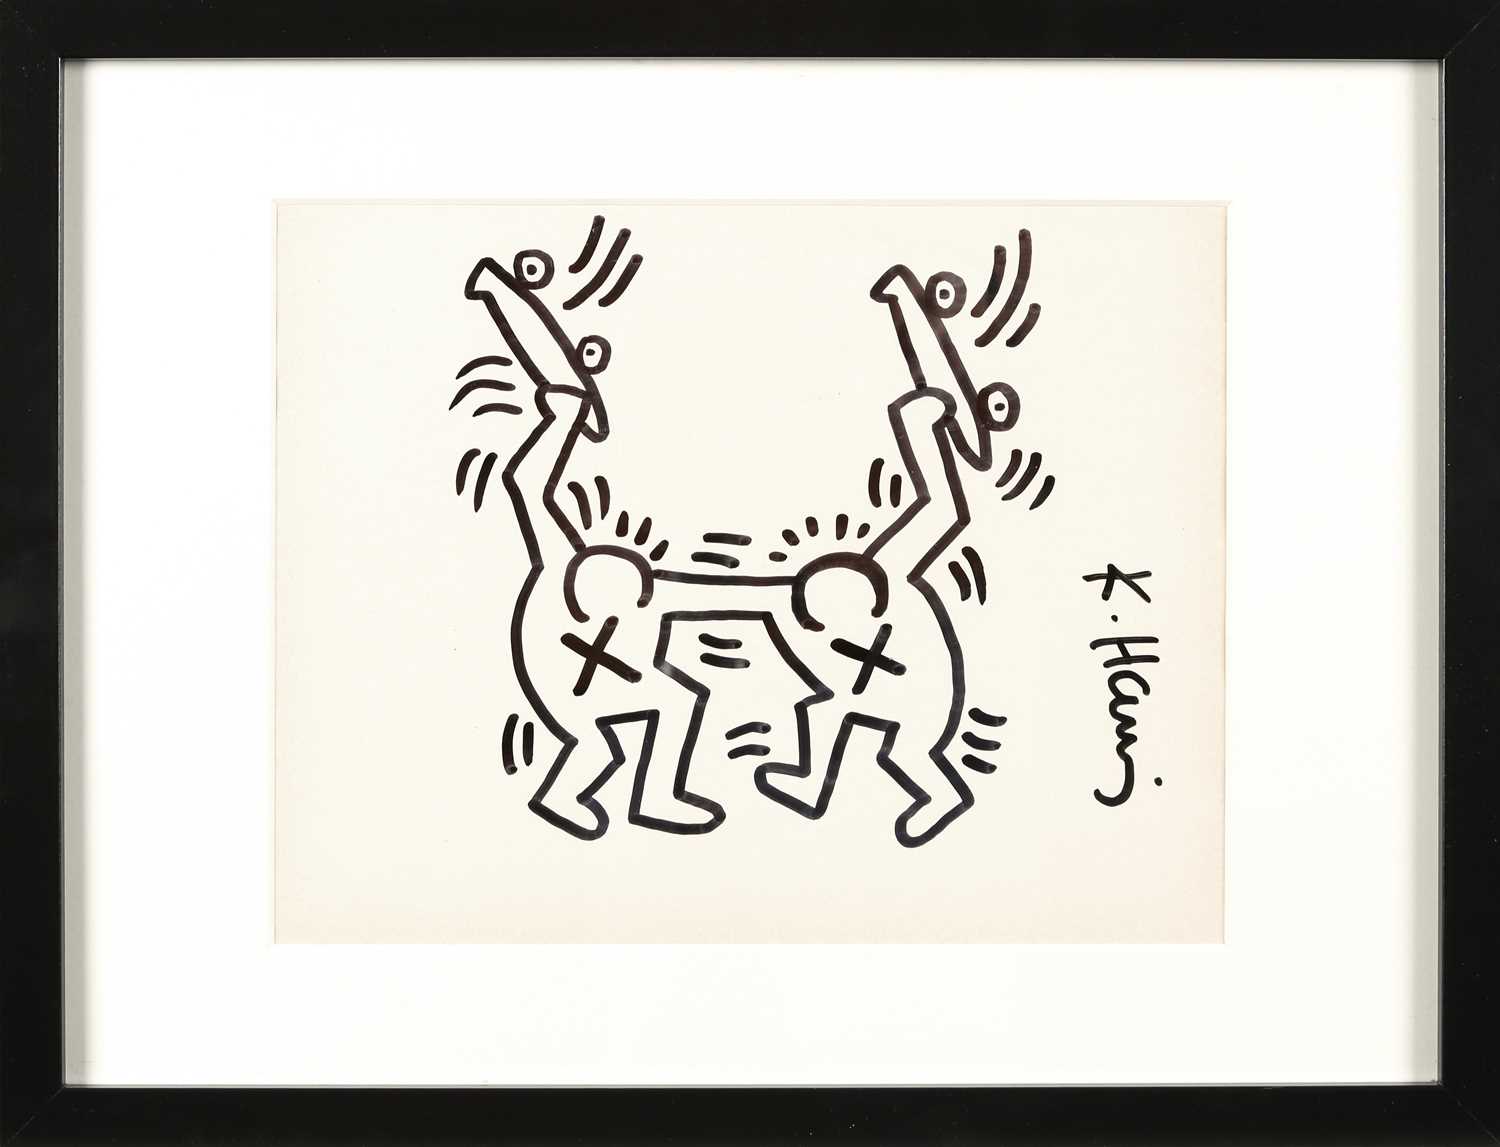 Lot 14 - Keith HARING (American artist, born 1958 – died 1990)